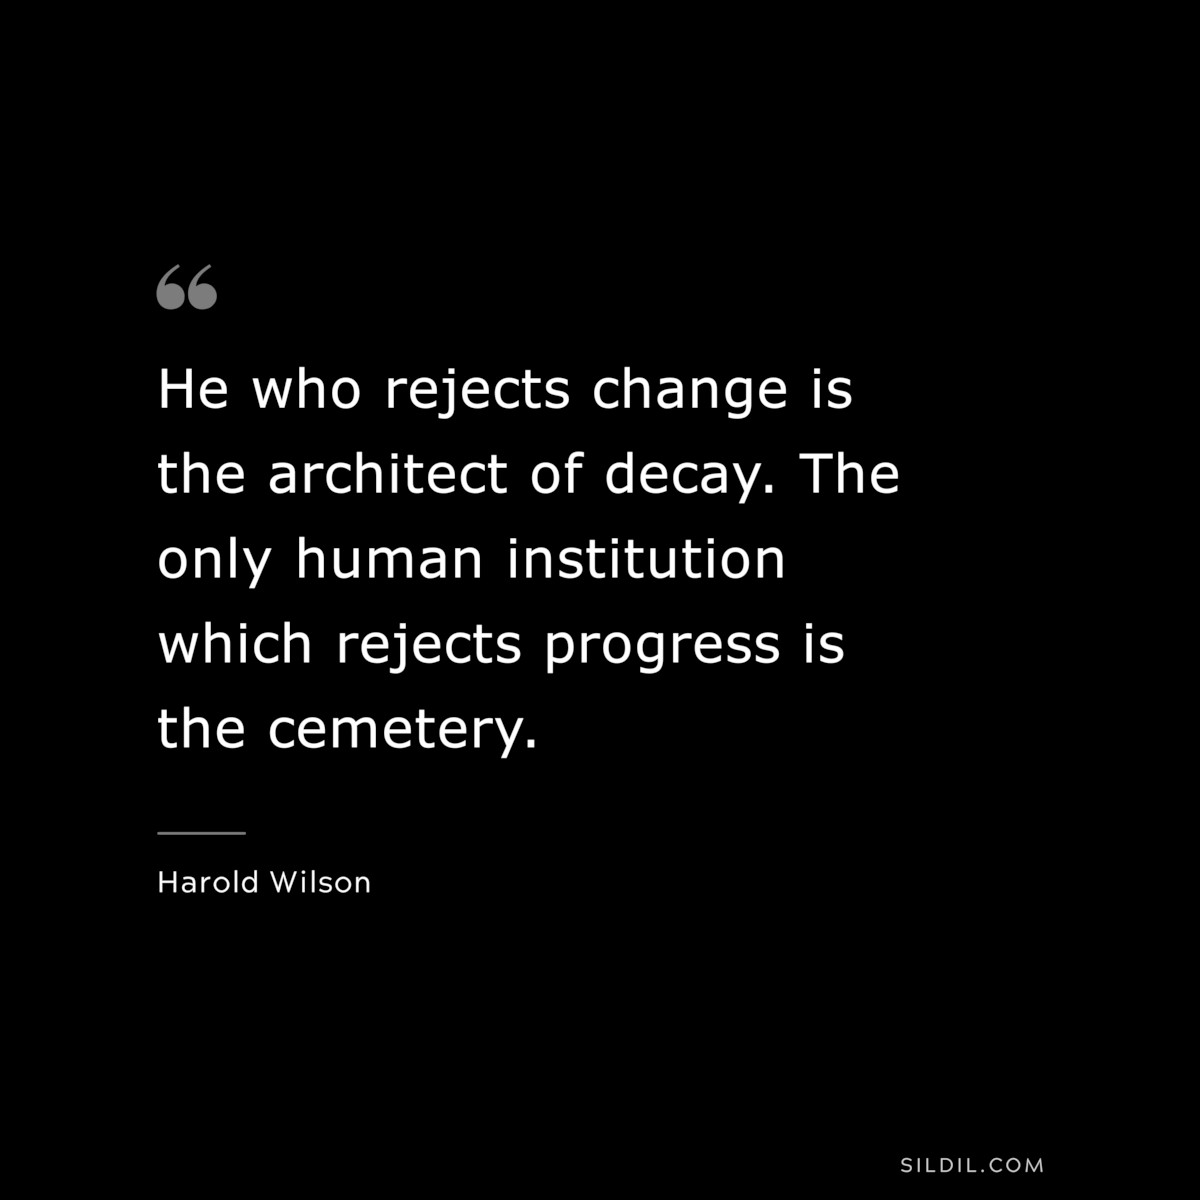 He who rejects change is the architect of decay. The only human institution which rejects progress is the cemetery. ― Harold Wilson